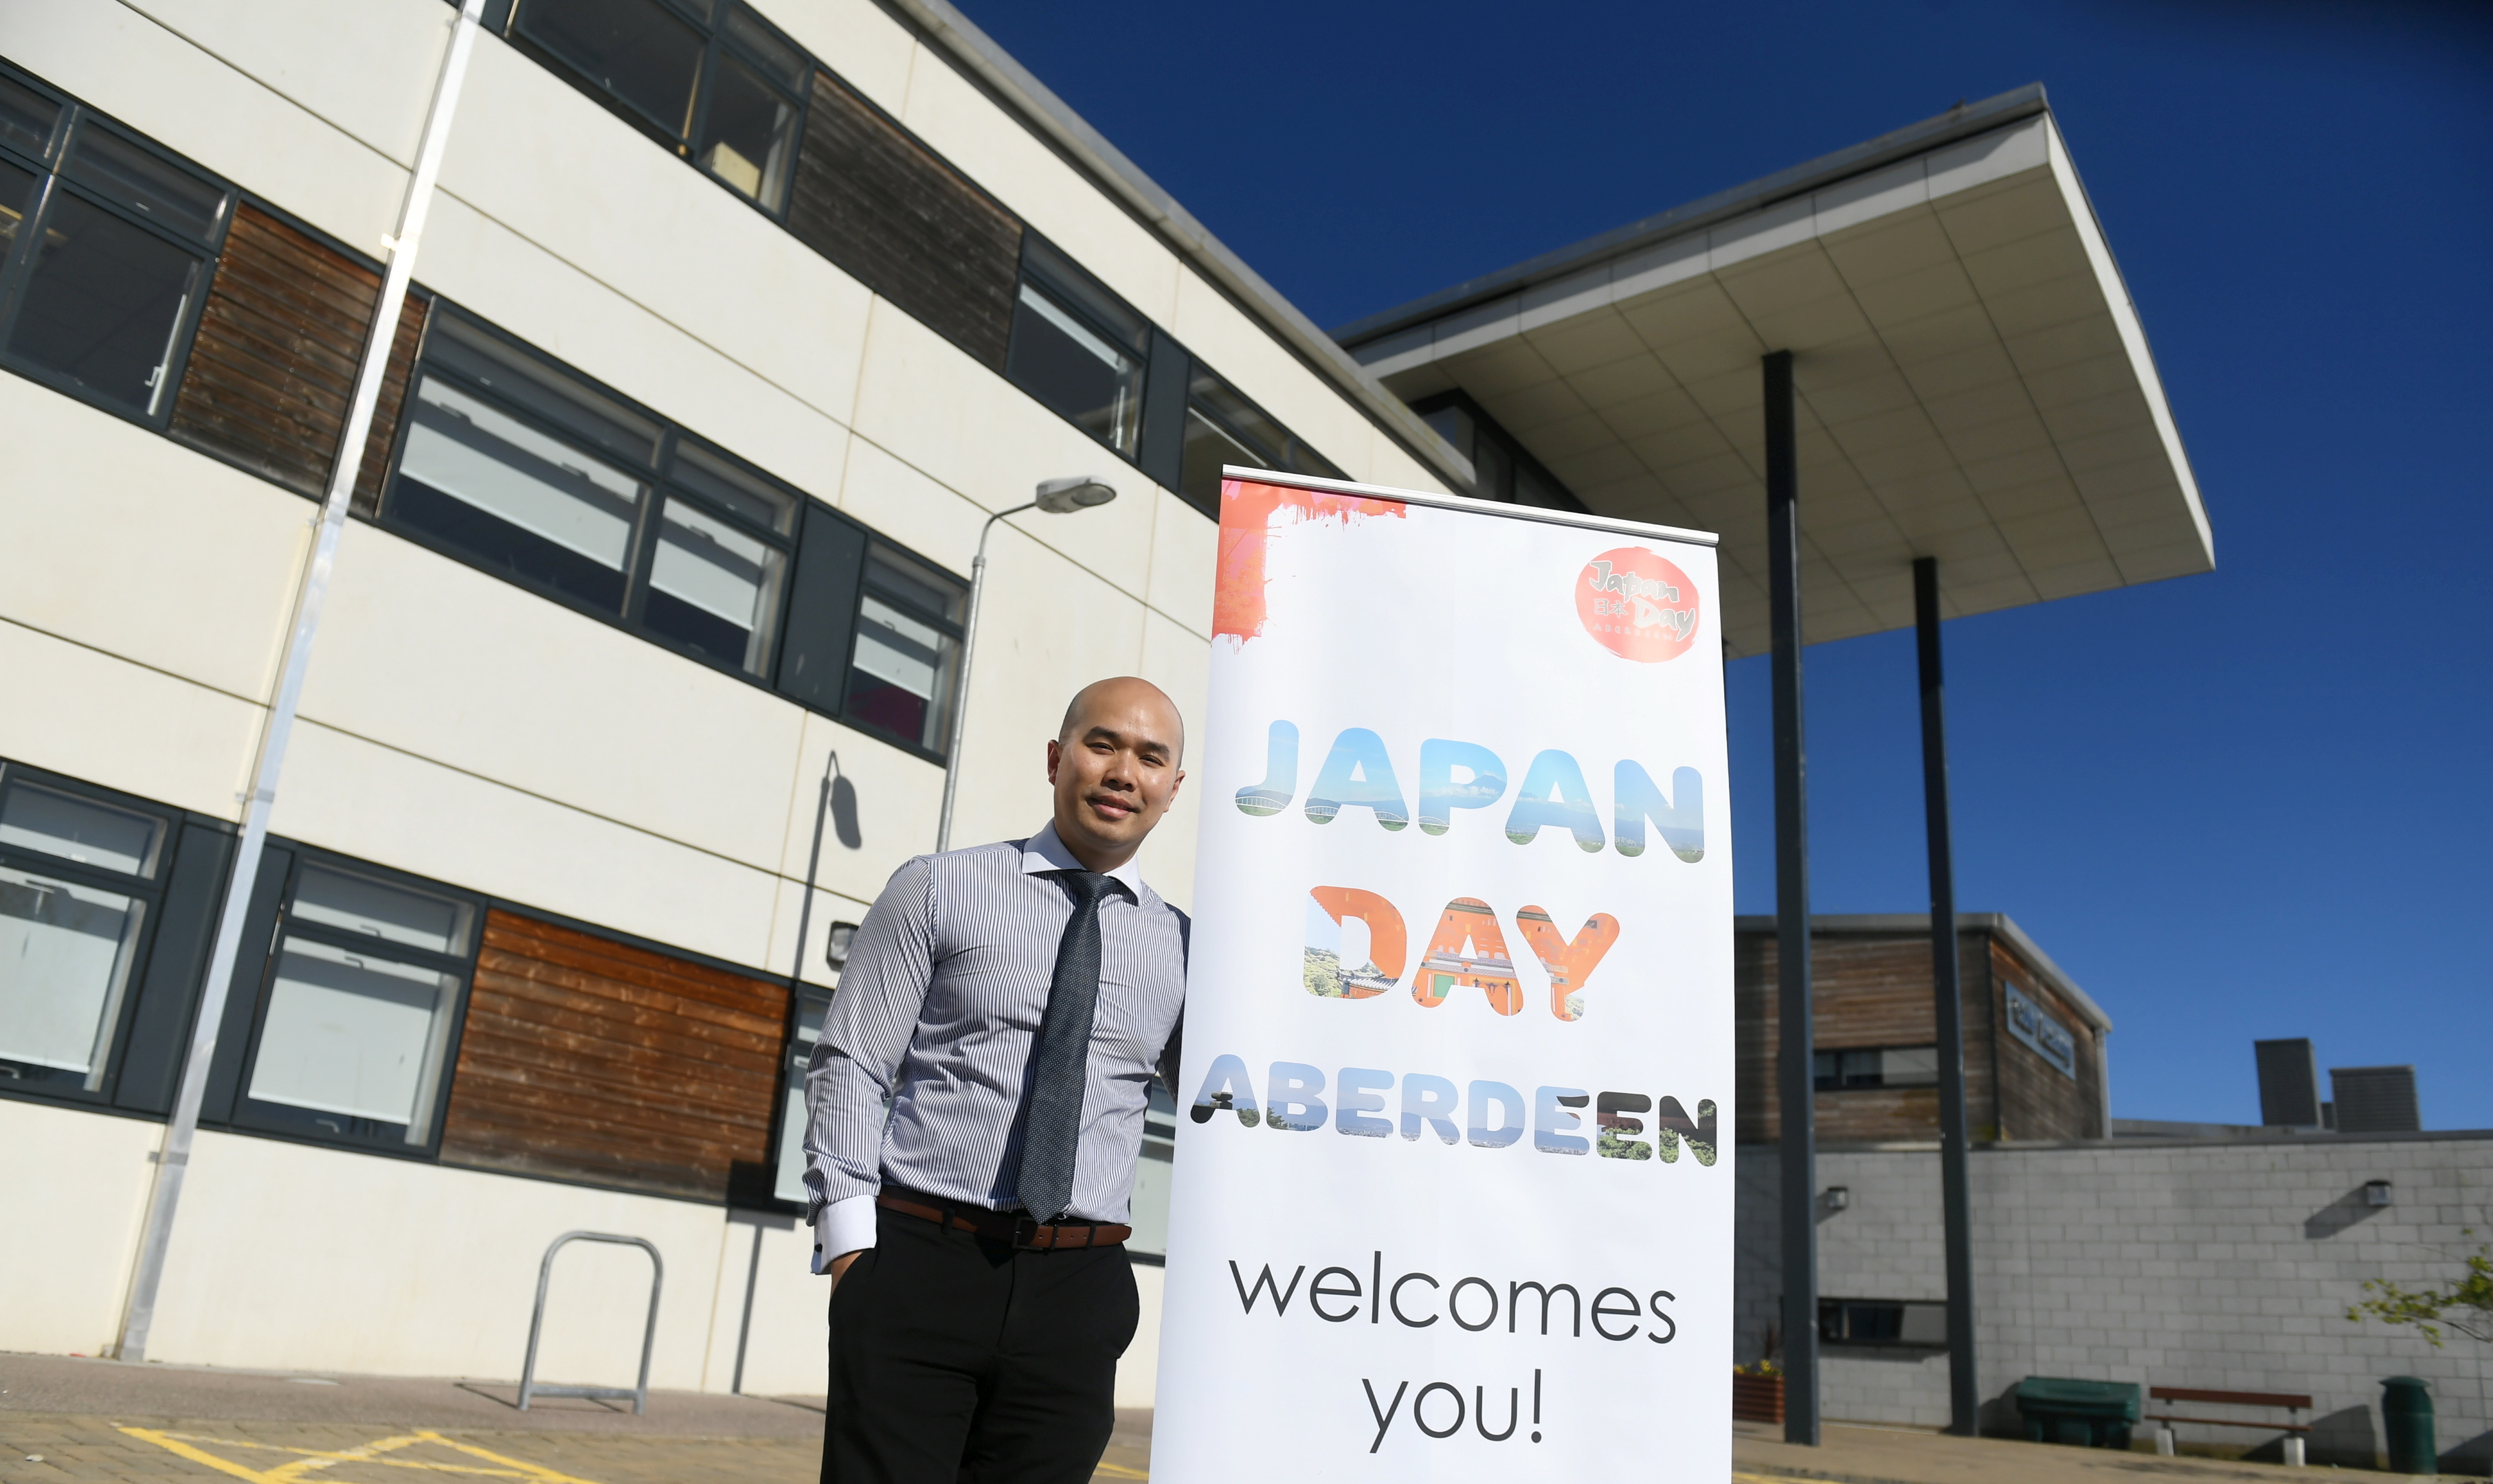 Preston Gan helped organise Japan Day Aberdeen 2018 at Cults Academy. Picture by Chris Sumner